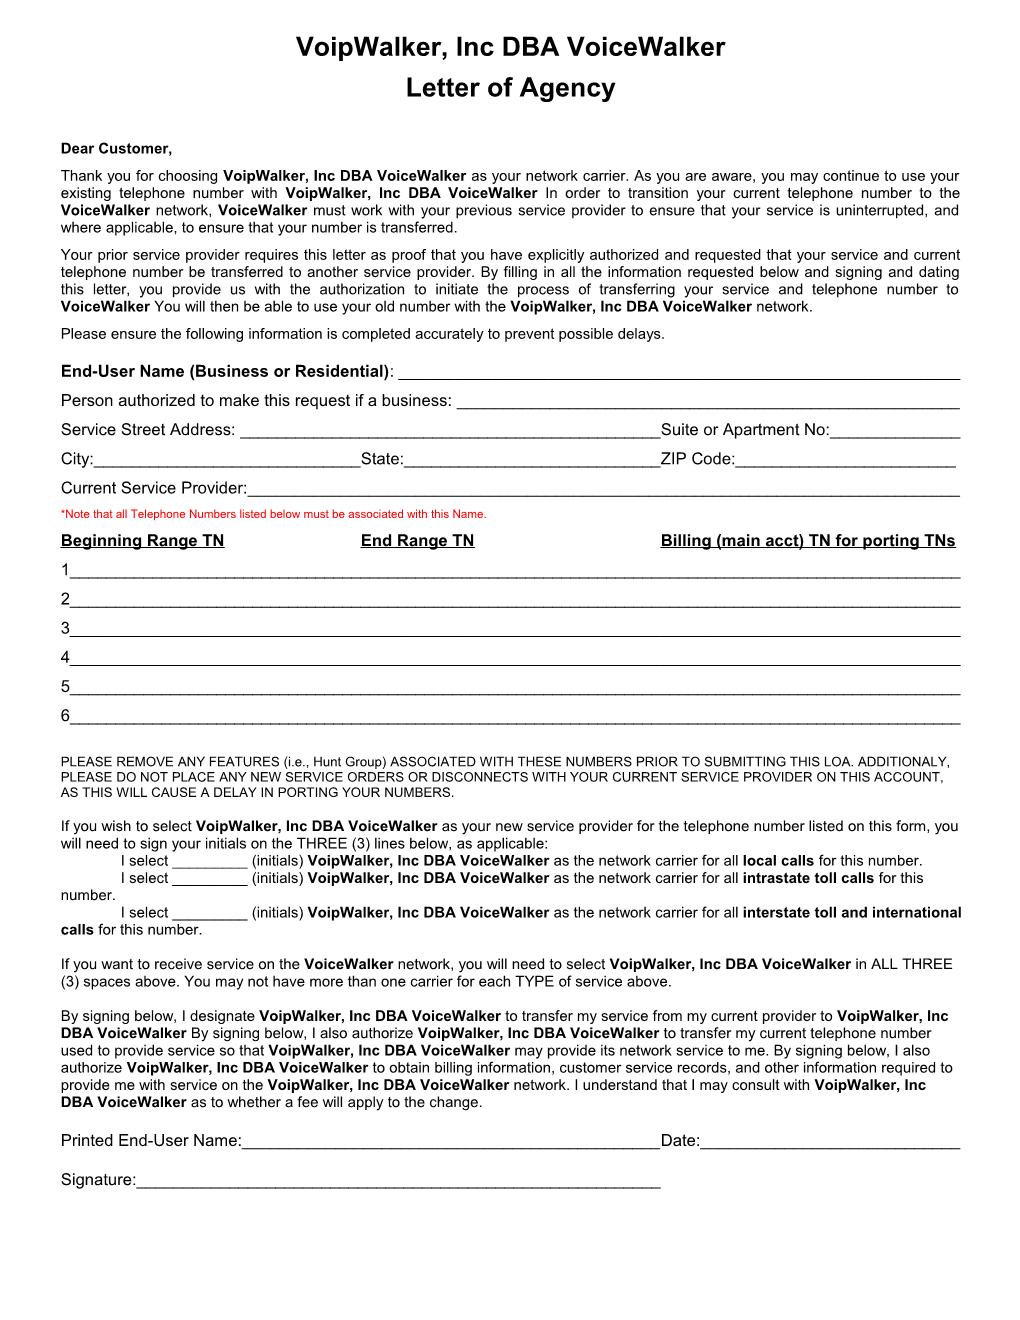 The Standard Letter of Authorization Document